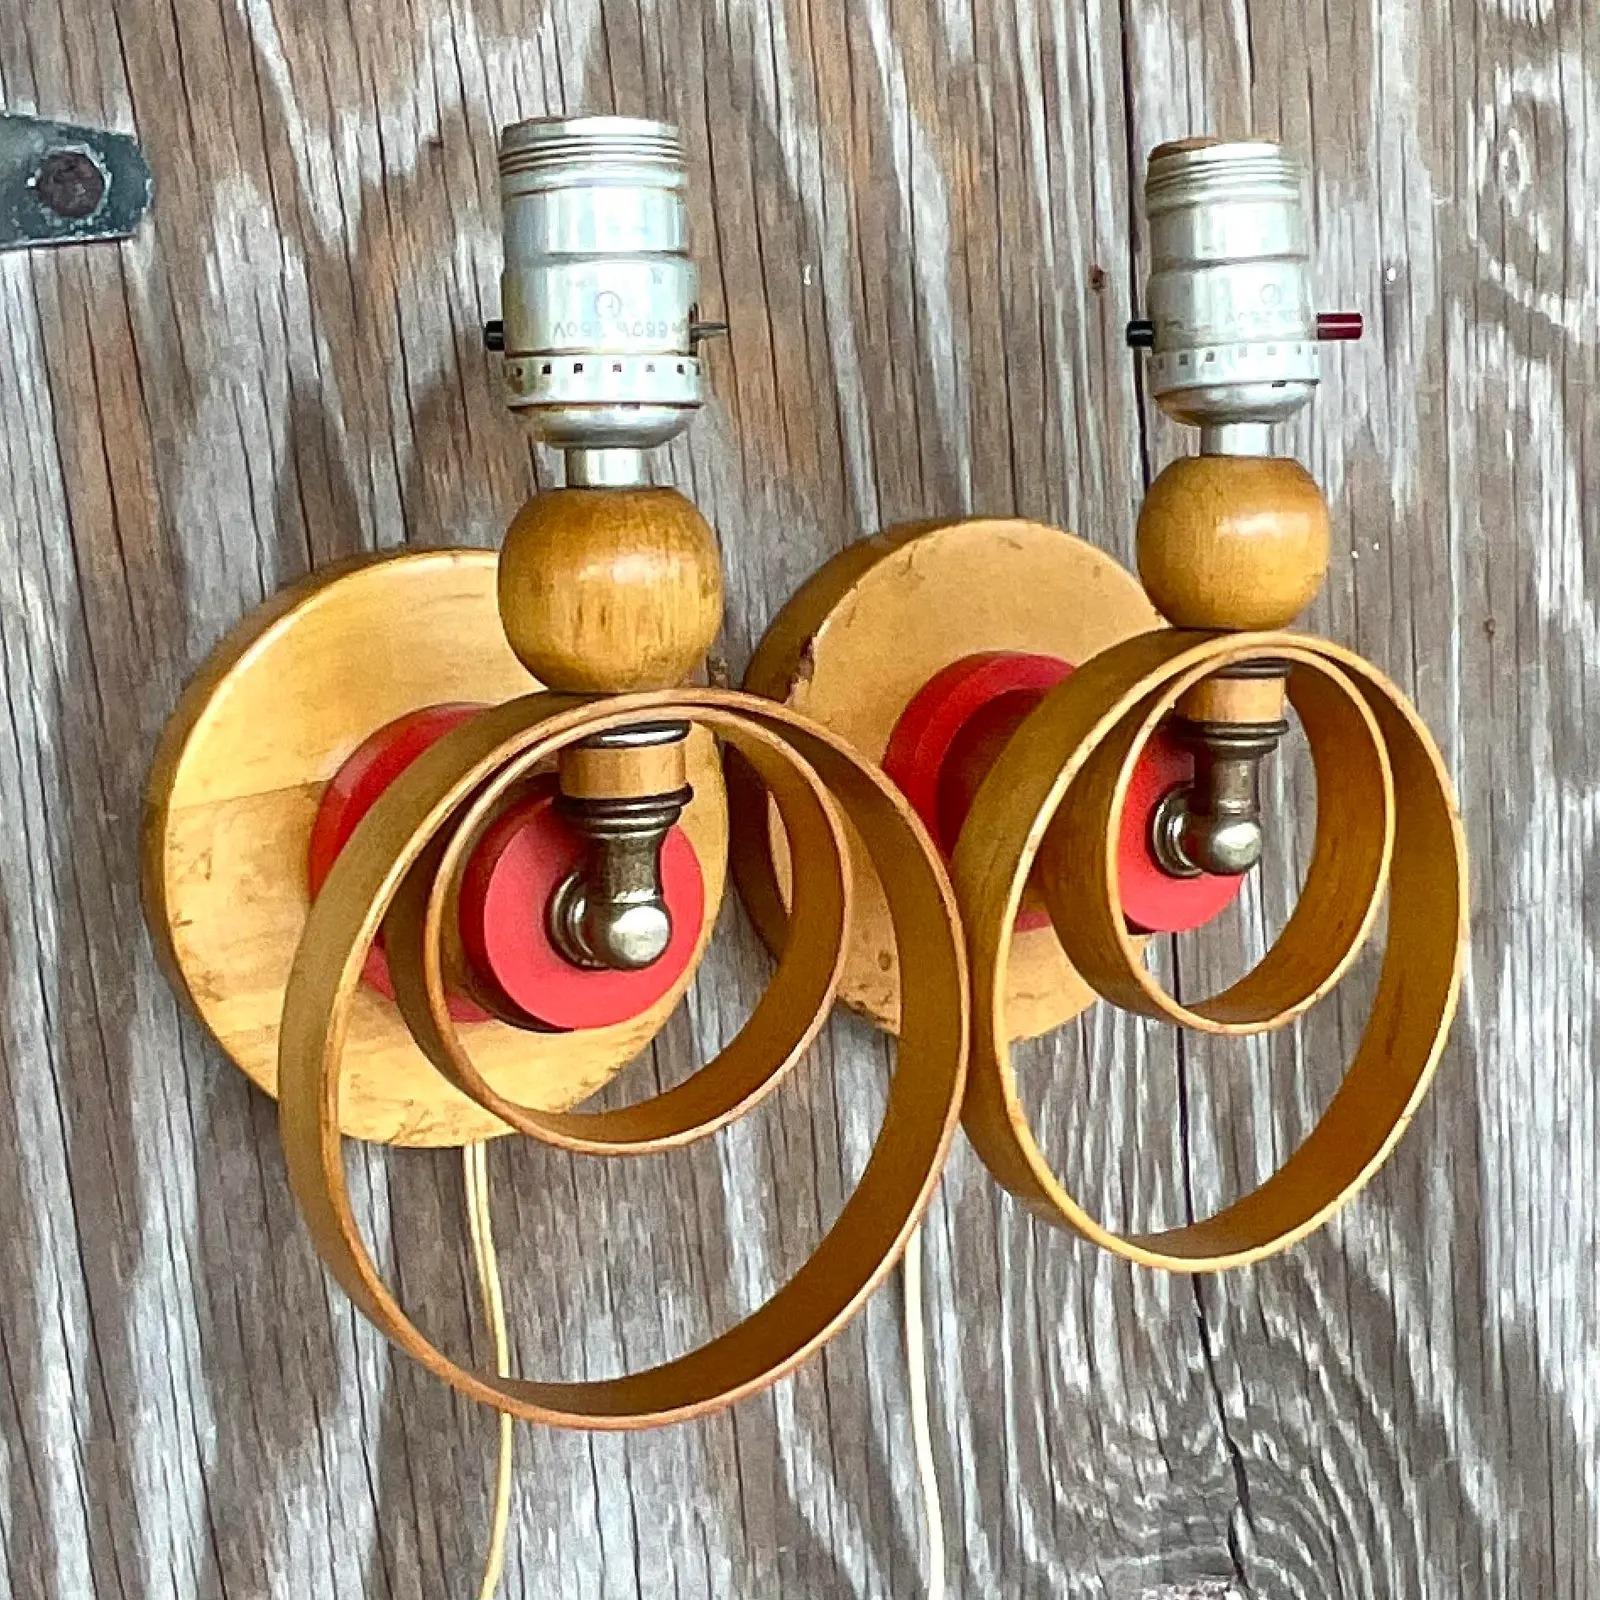 An incredible pair of vintage MCM wall sconces. The most amazing ring design with bright flashes of red. Hardwired to plug into the wall. All the great patina from time. Acquired from a Palm Beach estate.